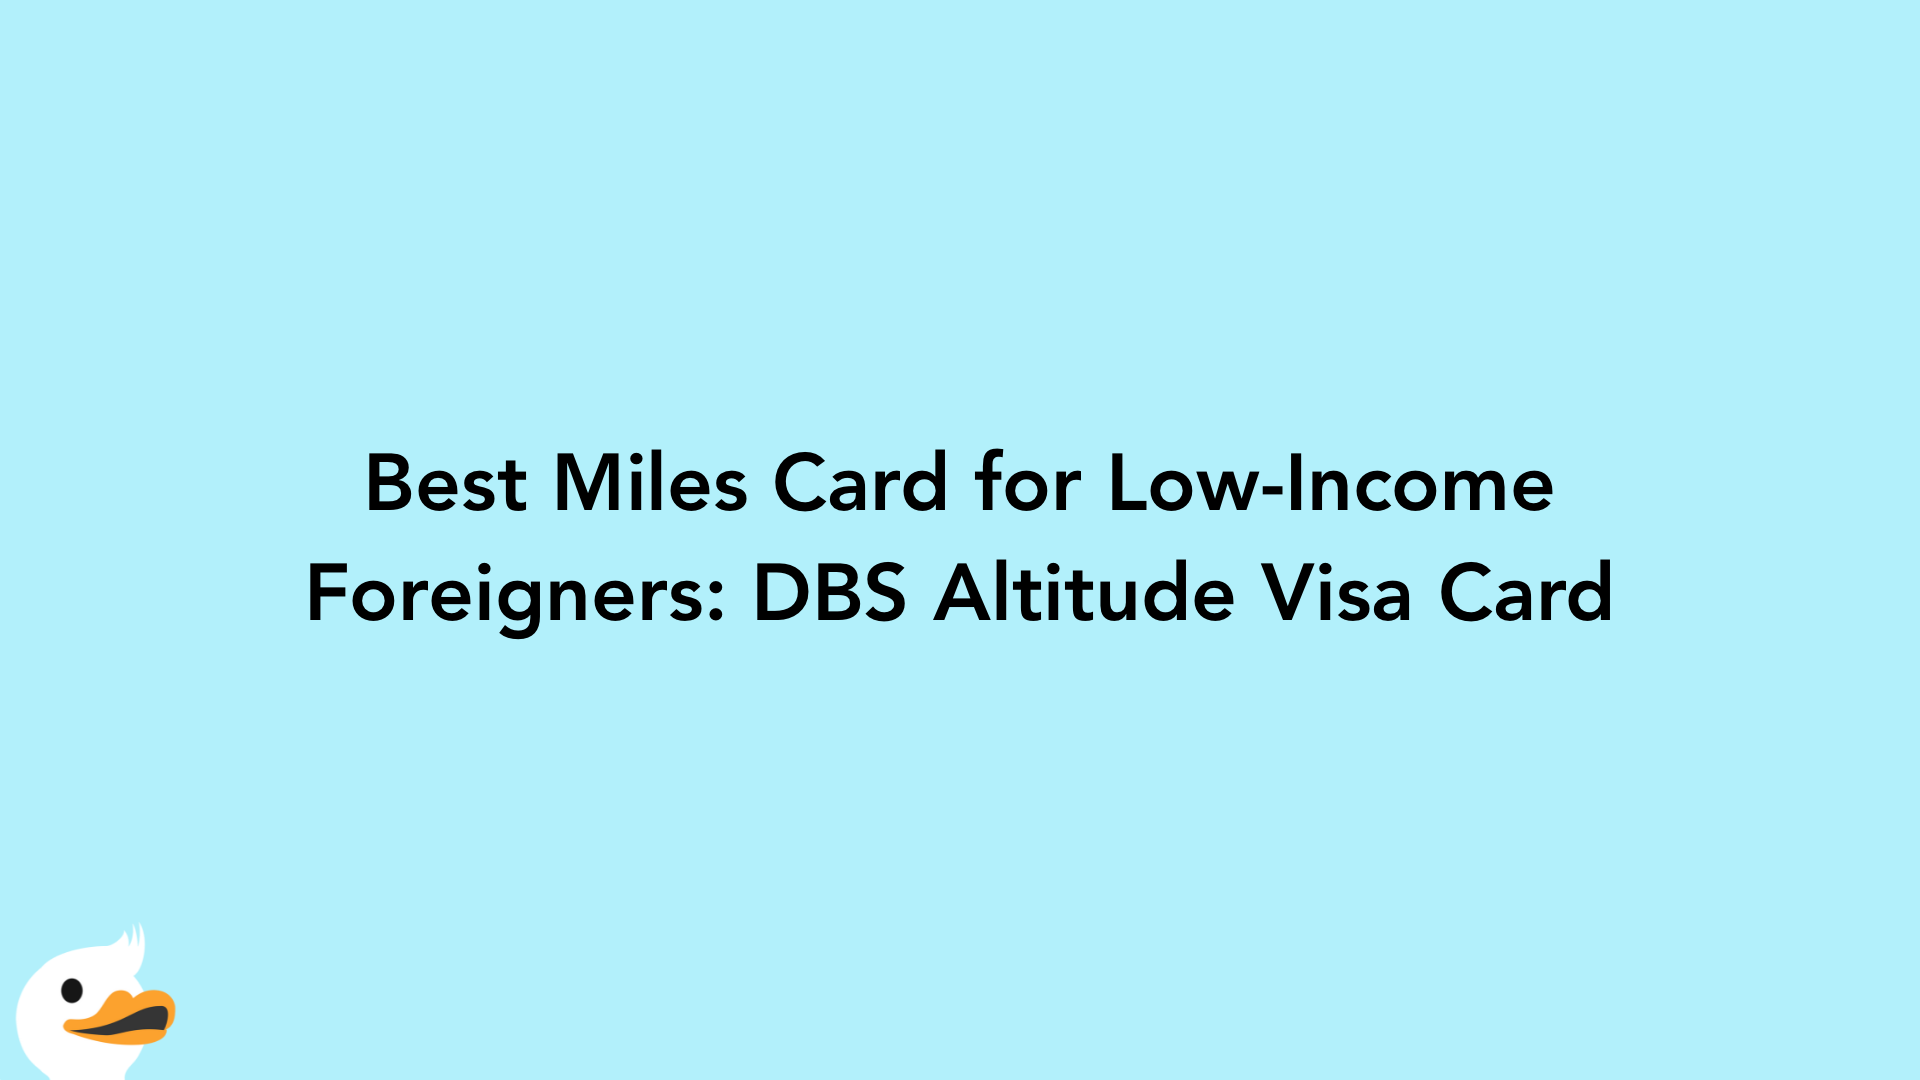 Best Miles Card for Low-Income Foreigners: DBS Altitude Visa Card